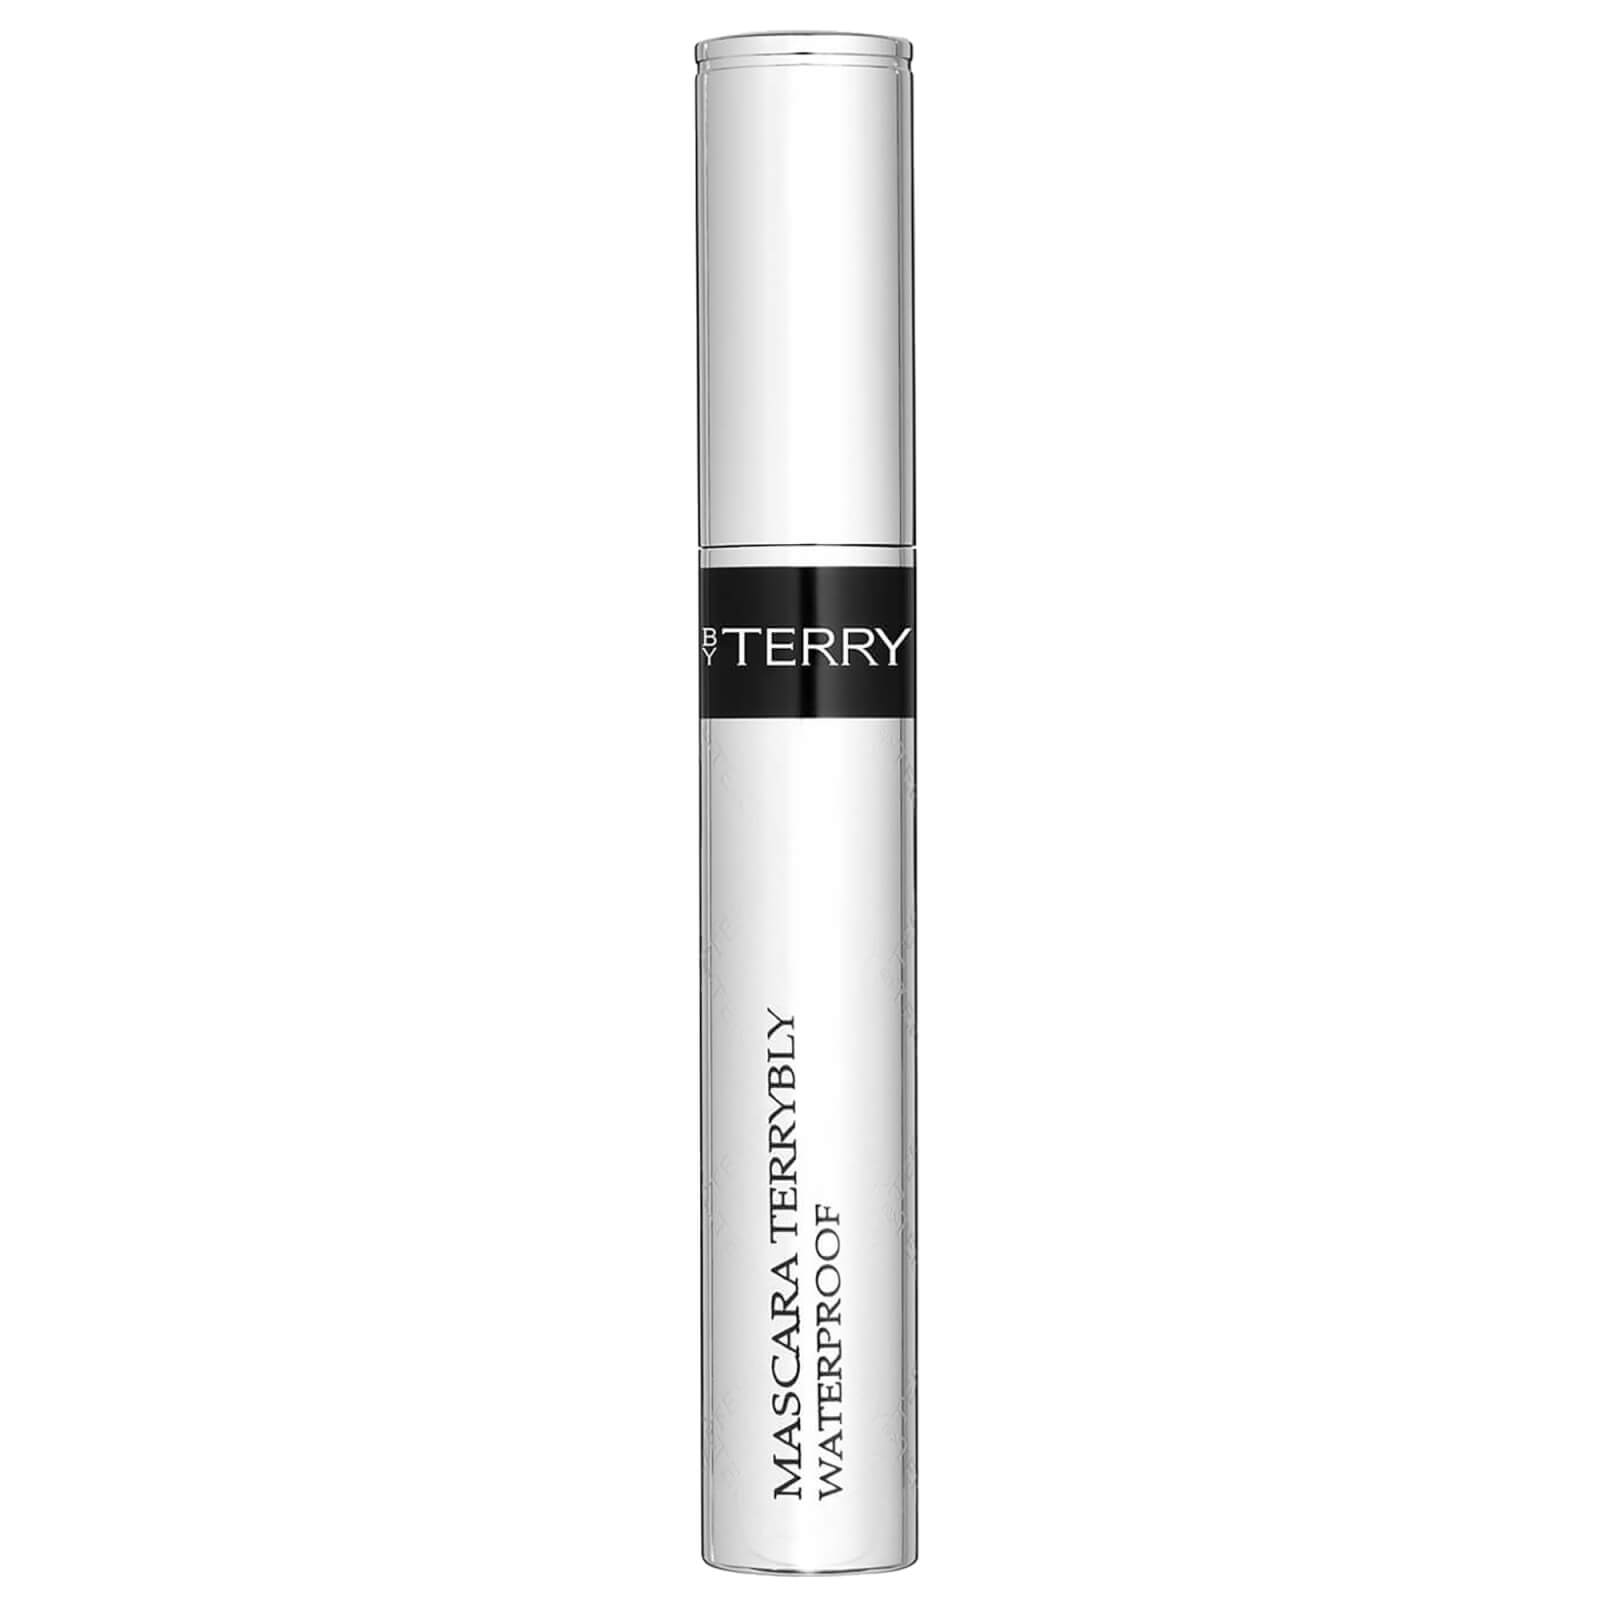 By Terry Terrybly mascara waterproof - nero 8 g